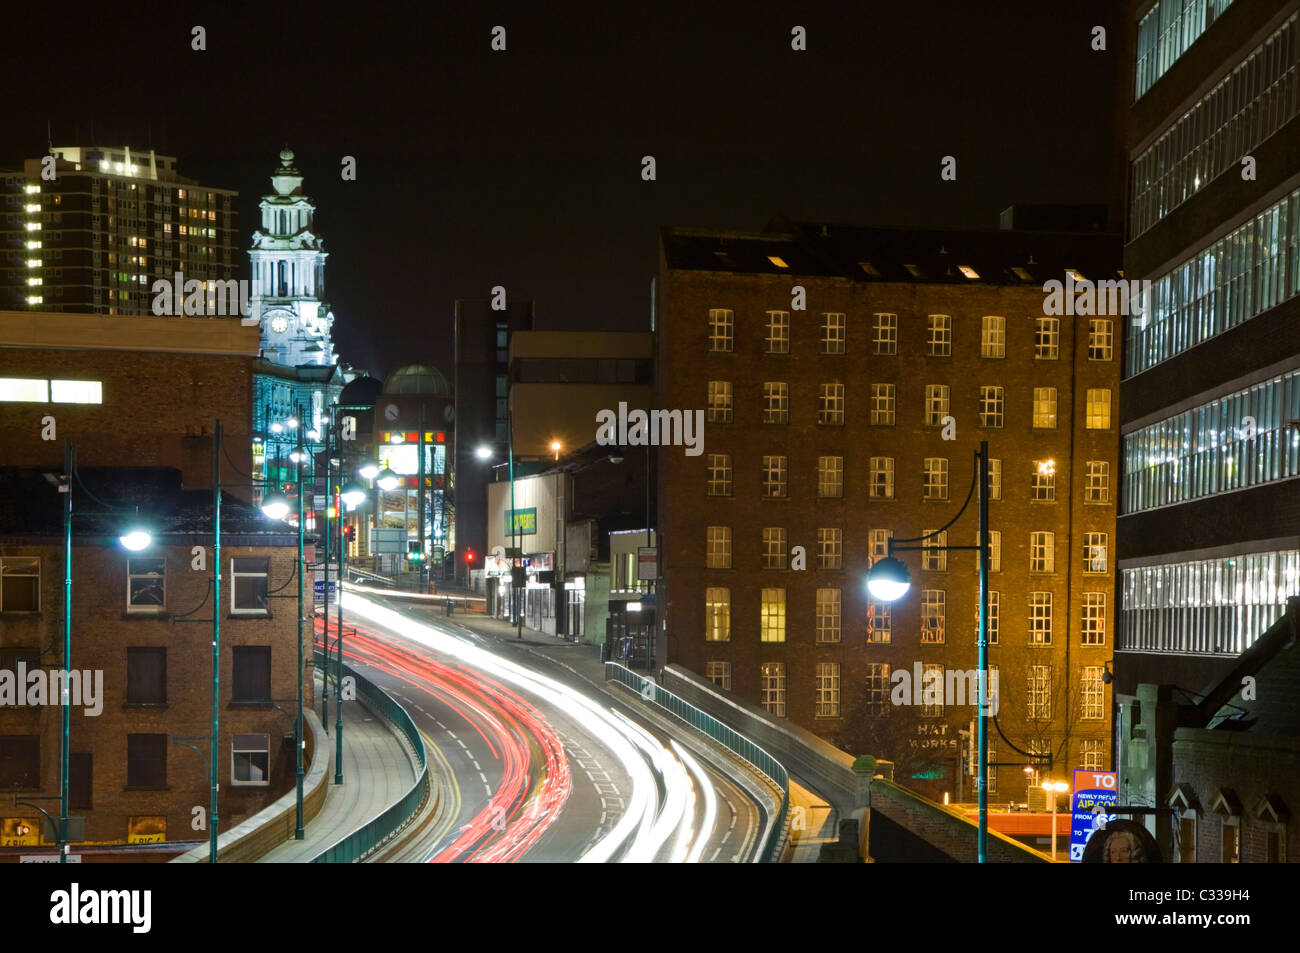 The Main A6 Road, Stockport Town Hall & Town Centre at Night, Stockport, Greater Manchester, England, UK Stock Photo